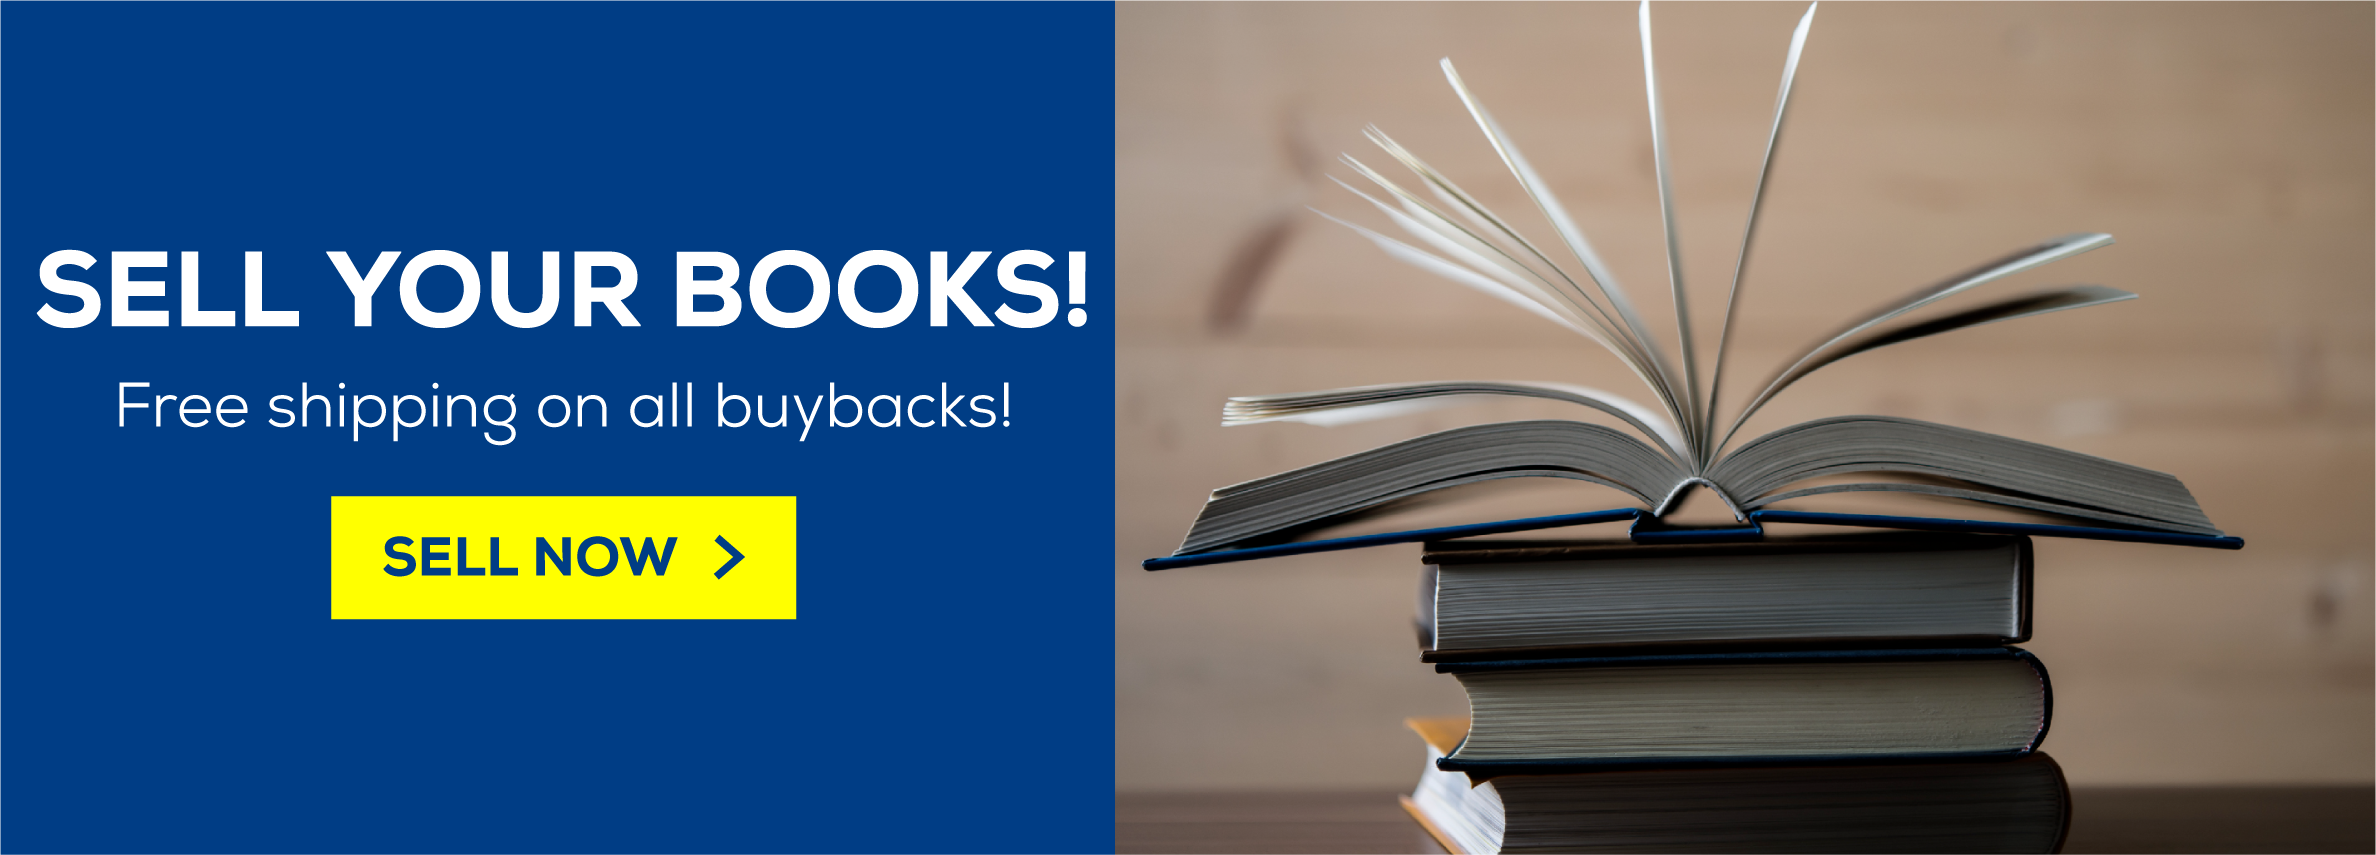 Sell your books! Free shipping on all buybacks! sell now